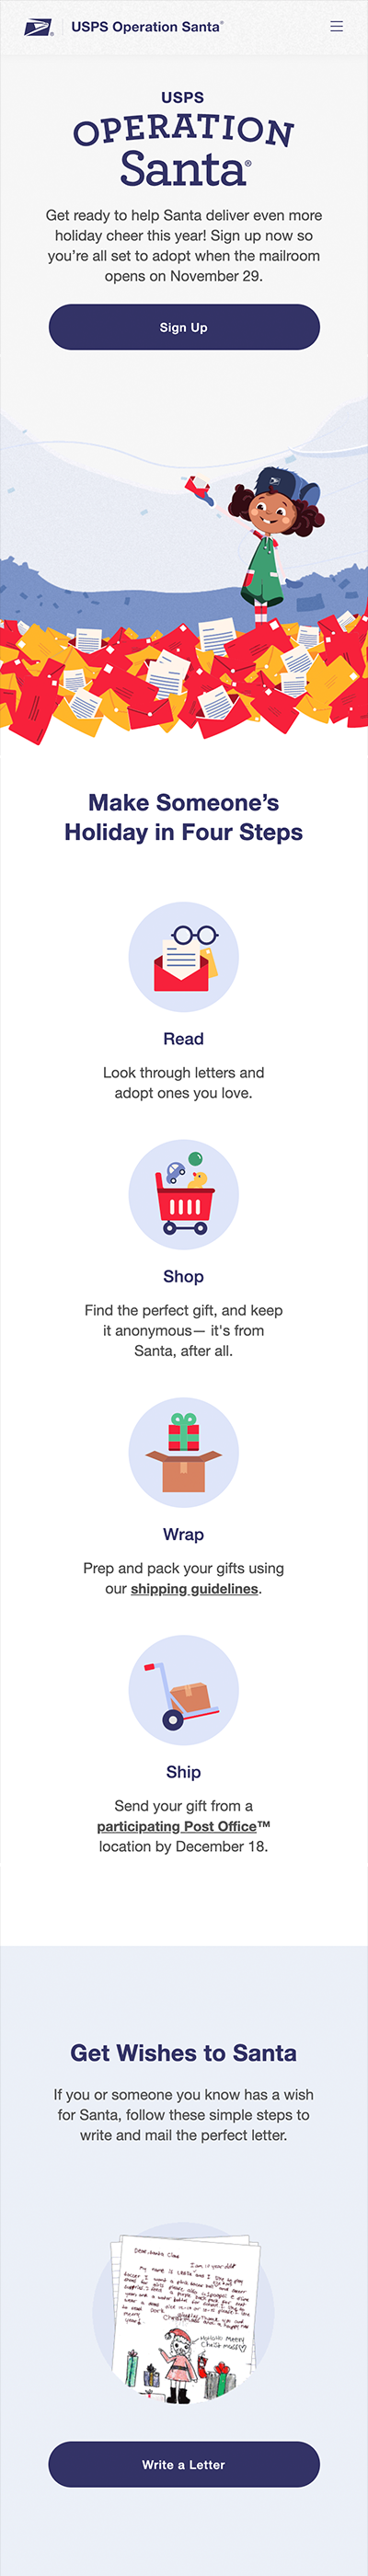 USPS Operation Santa: Make Someone’s Holiday in Four Steps